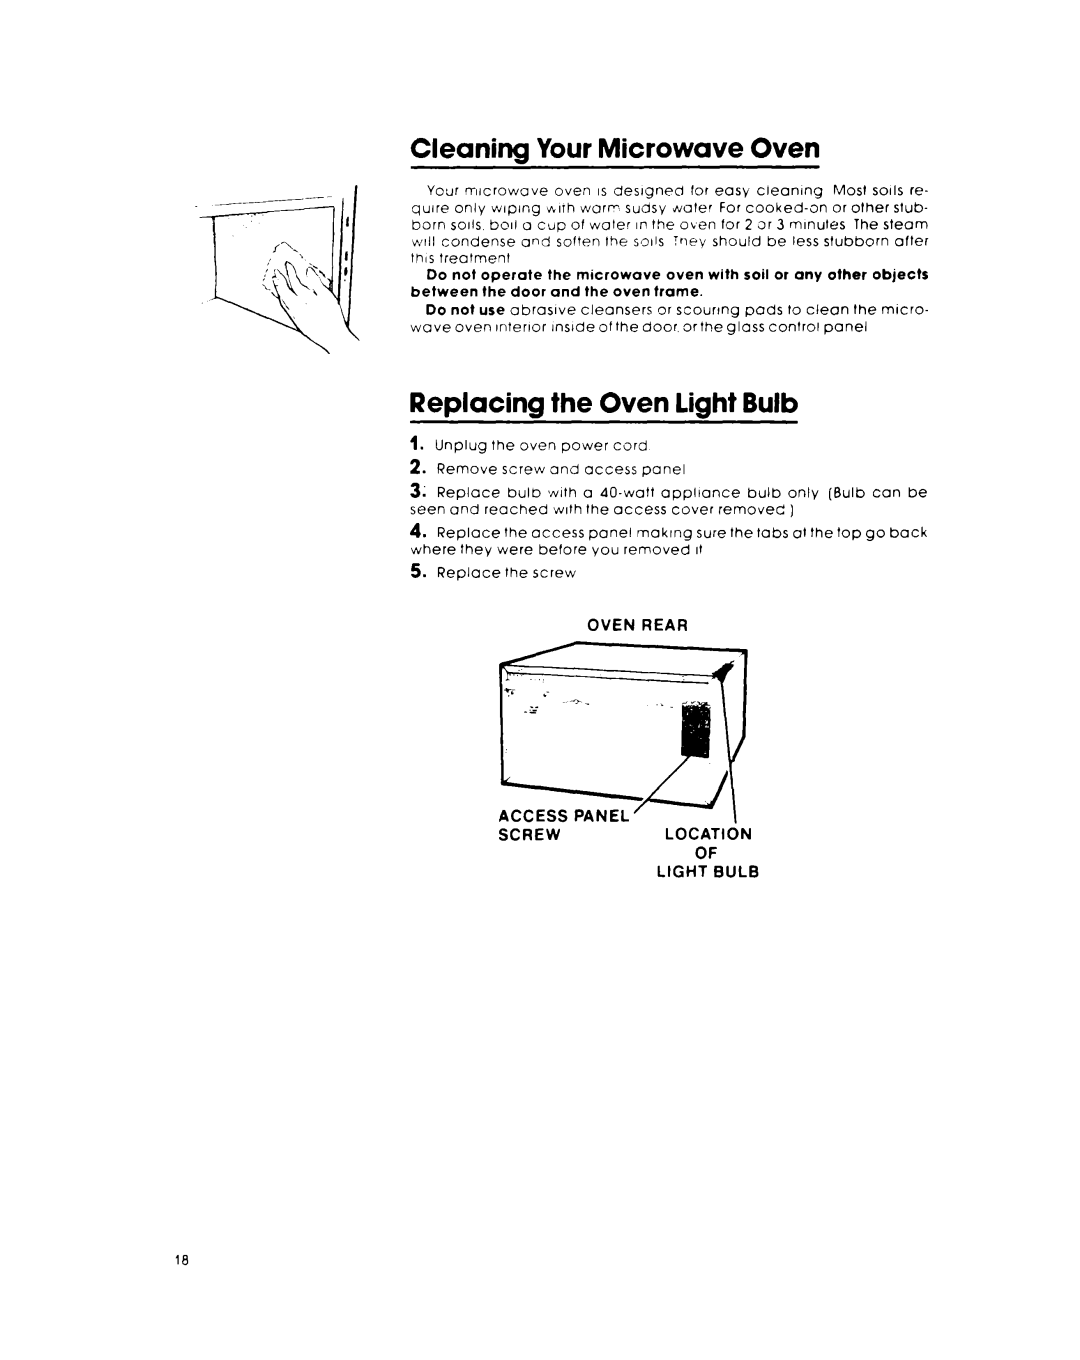 Whirlpool RJM 7800 Cleaning Your Microwave Oven, Replacing the Oven light Bulb, Oven Rear Screwlocation Of Light Bulb 